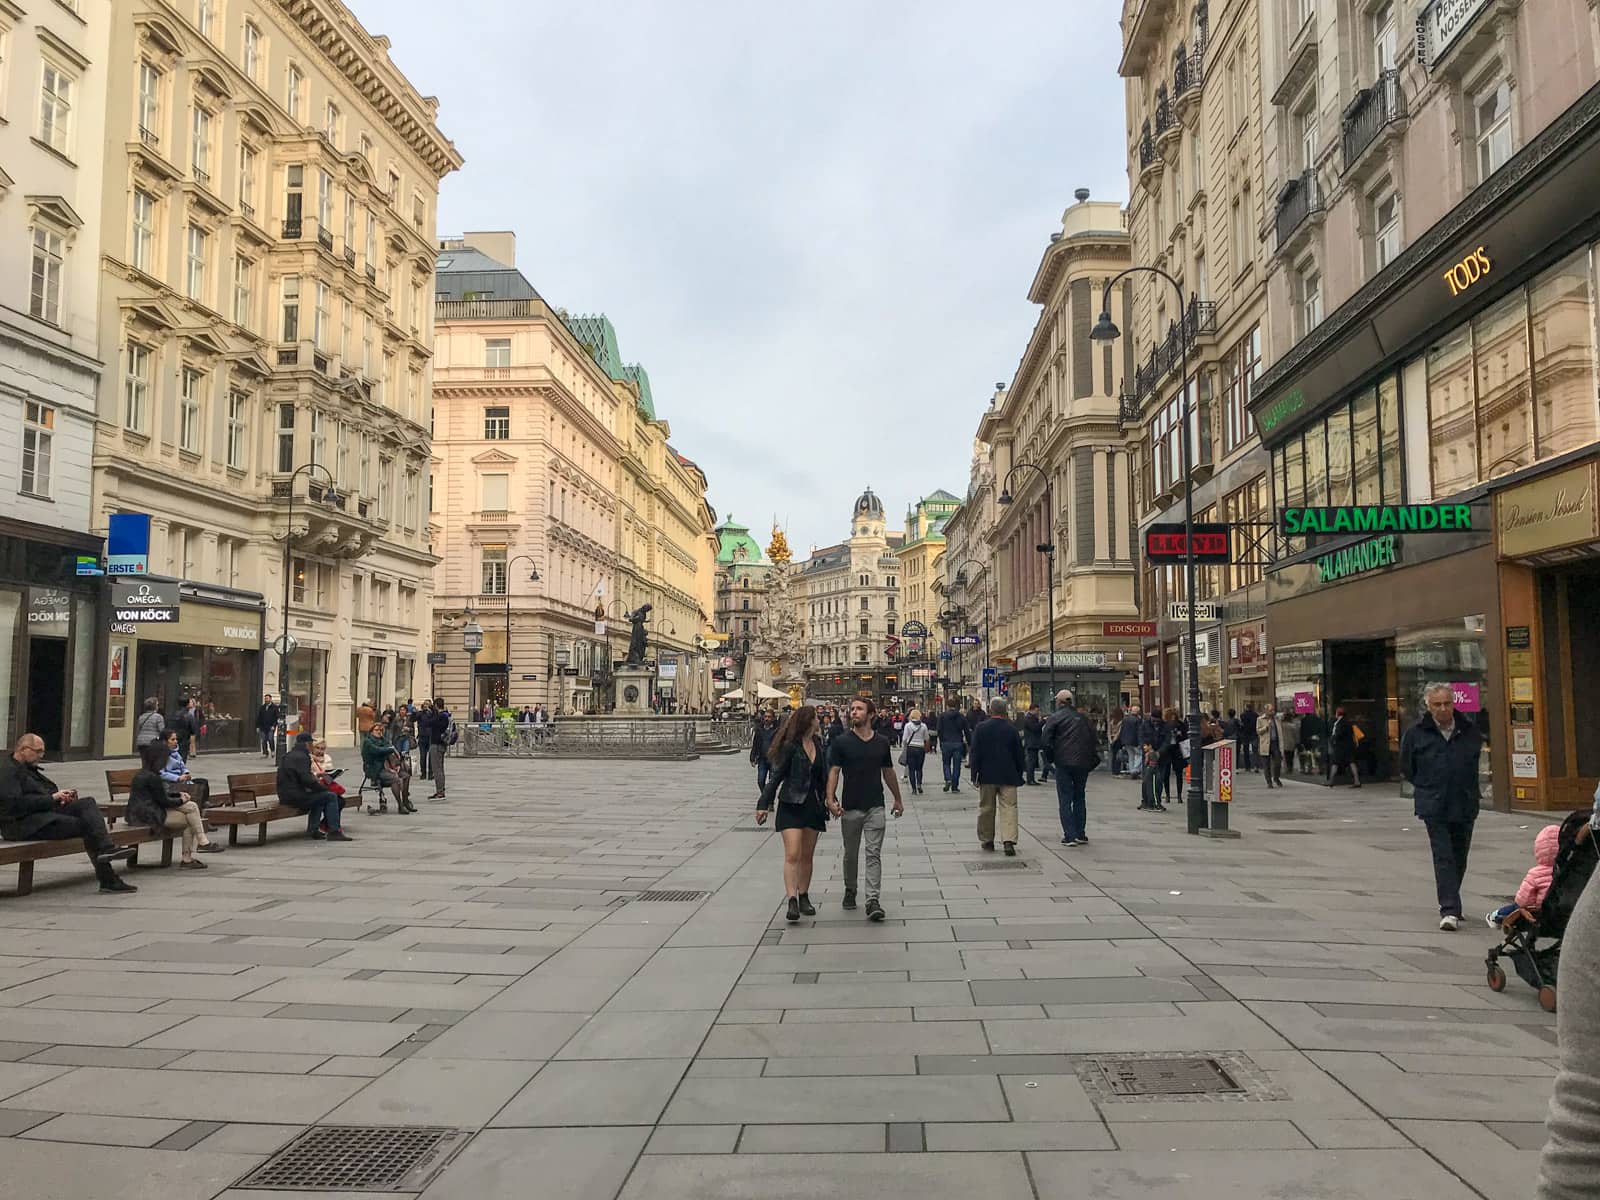 An outdoor shopping area in Vienna, in the late afternoon. People are walking through the mall